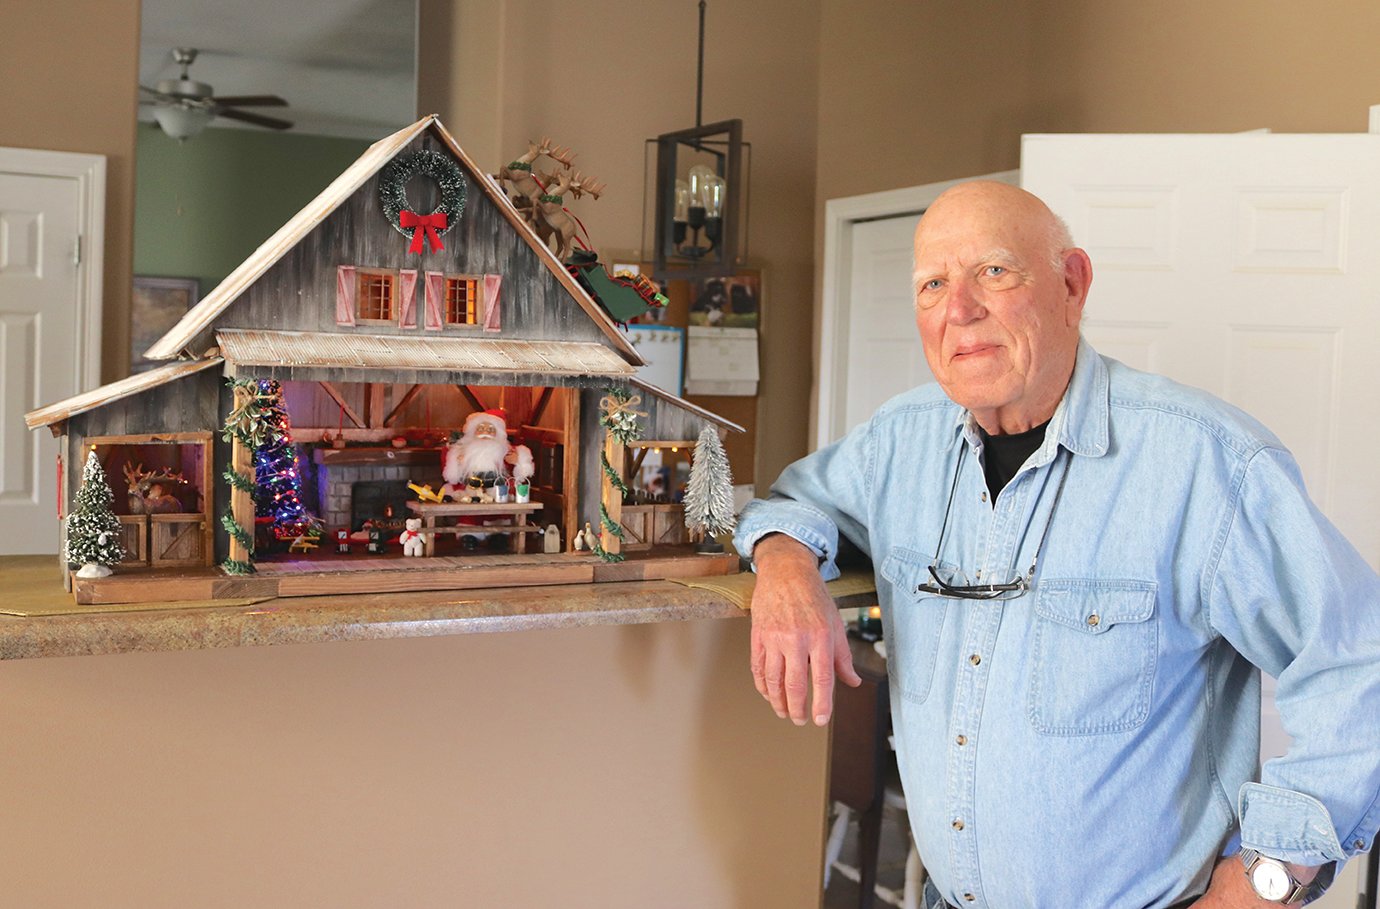 Eighty-two-year-old Richard Peterman proudly displays one of his latest creations Wednesday at his home; Peterman has been constructing miniaturized holiday homes, better known as Santa Houses, for nearly three decades for various organizations and businesses throughout Crawfordsville and Montgomery County.